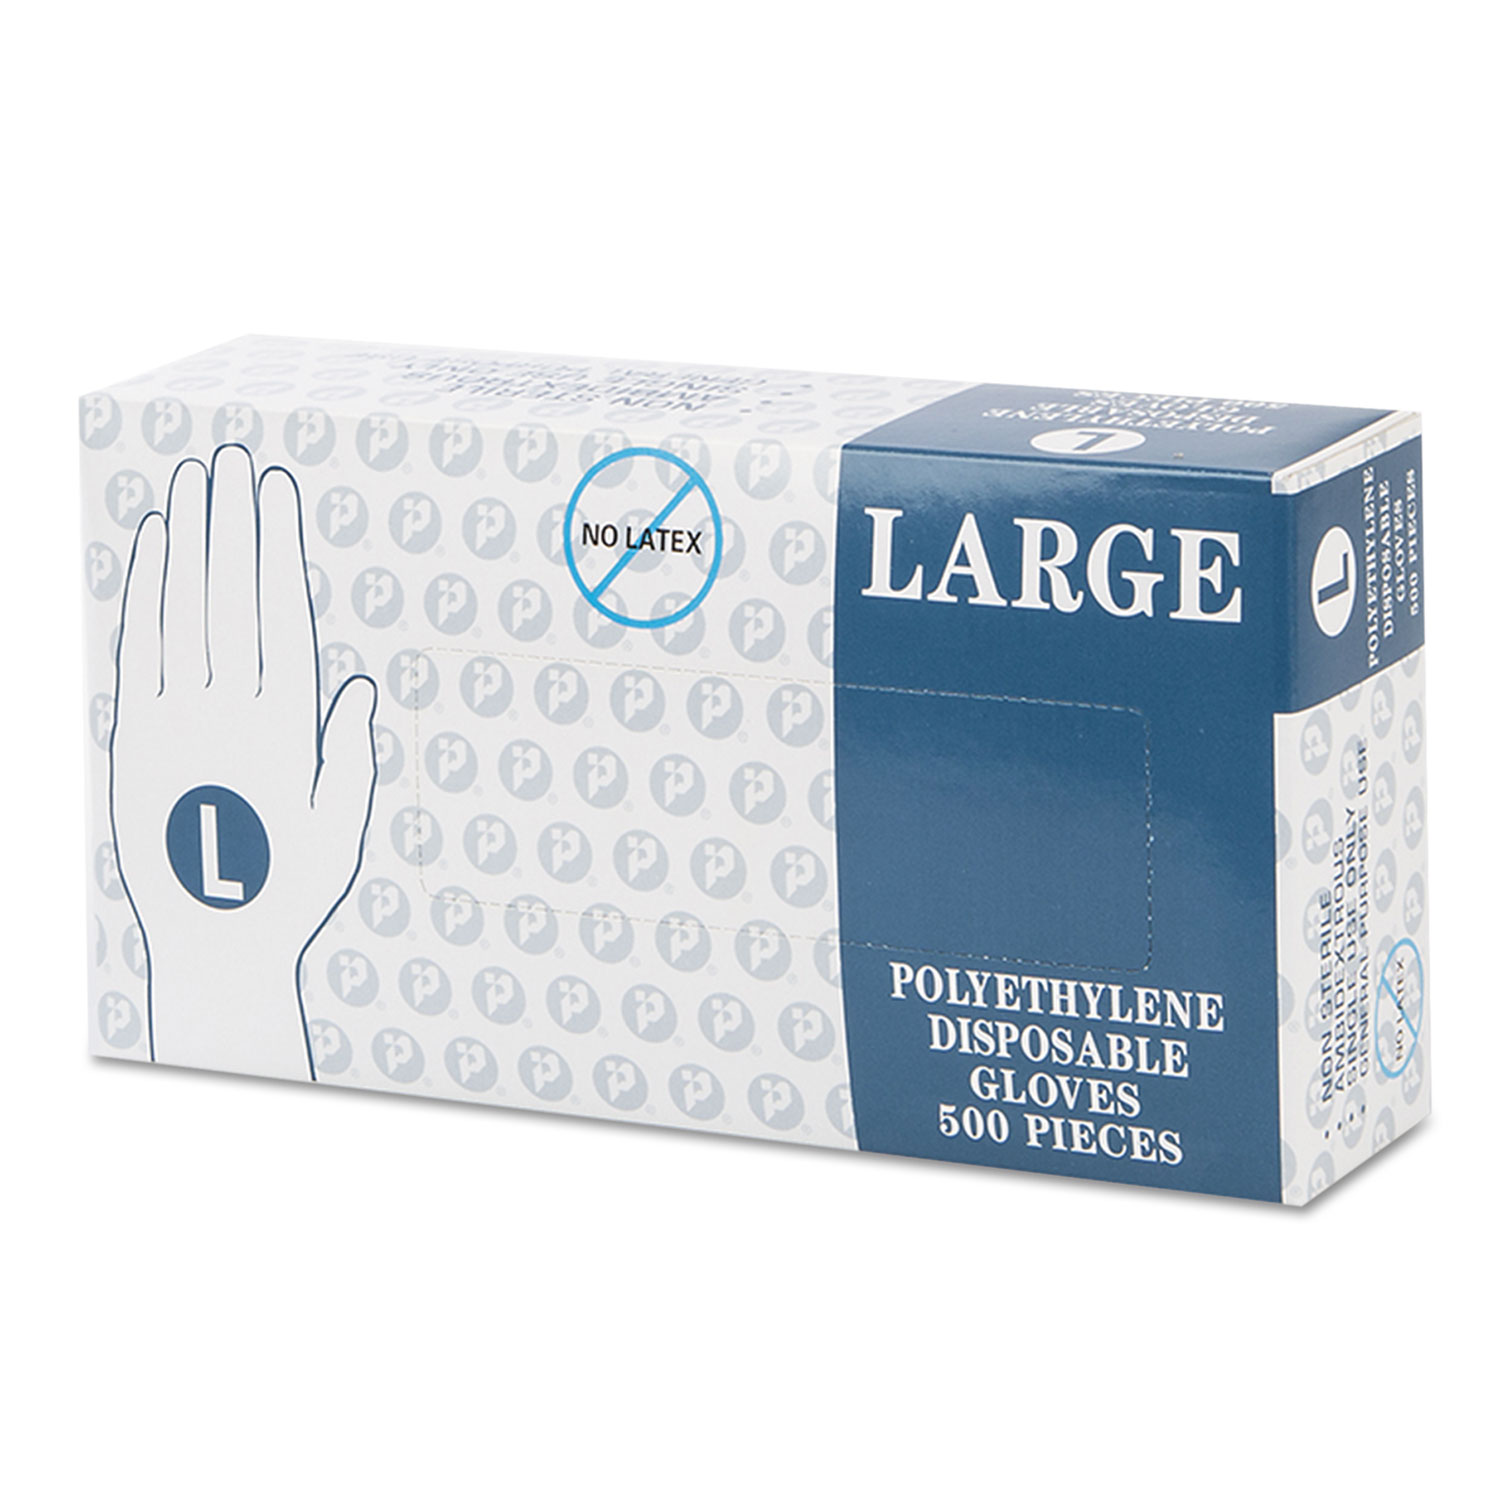  Inteplast Group GL-LARGE Poly Disposable Gloves, White, Large, 1000/Carton (IBSGLLARGE) 